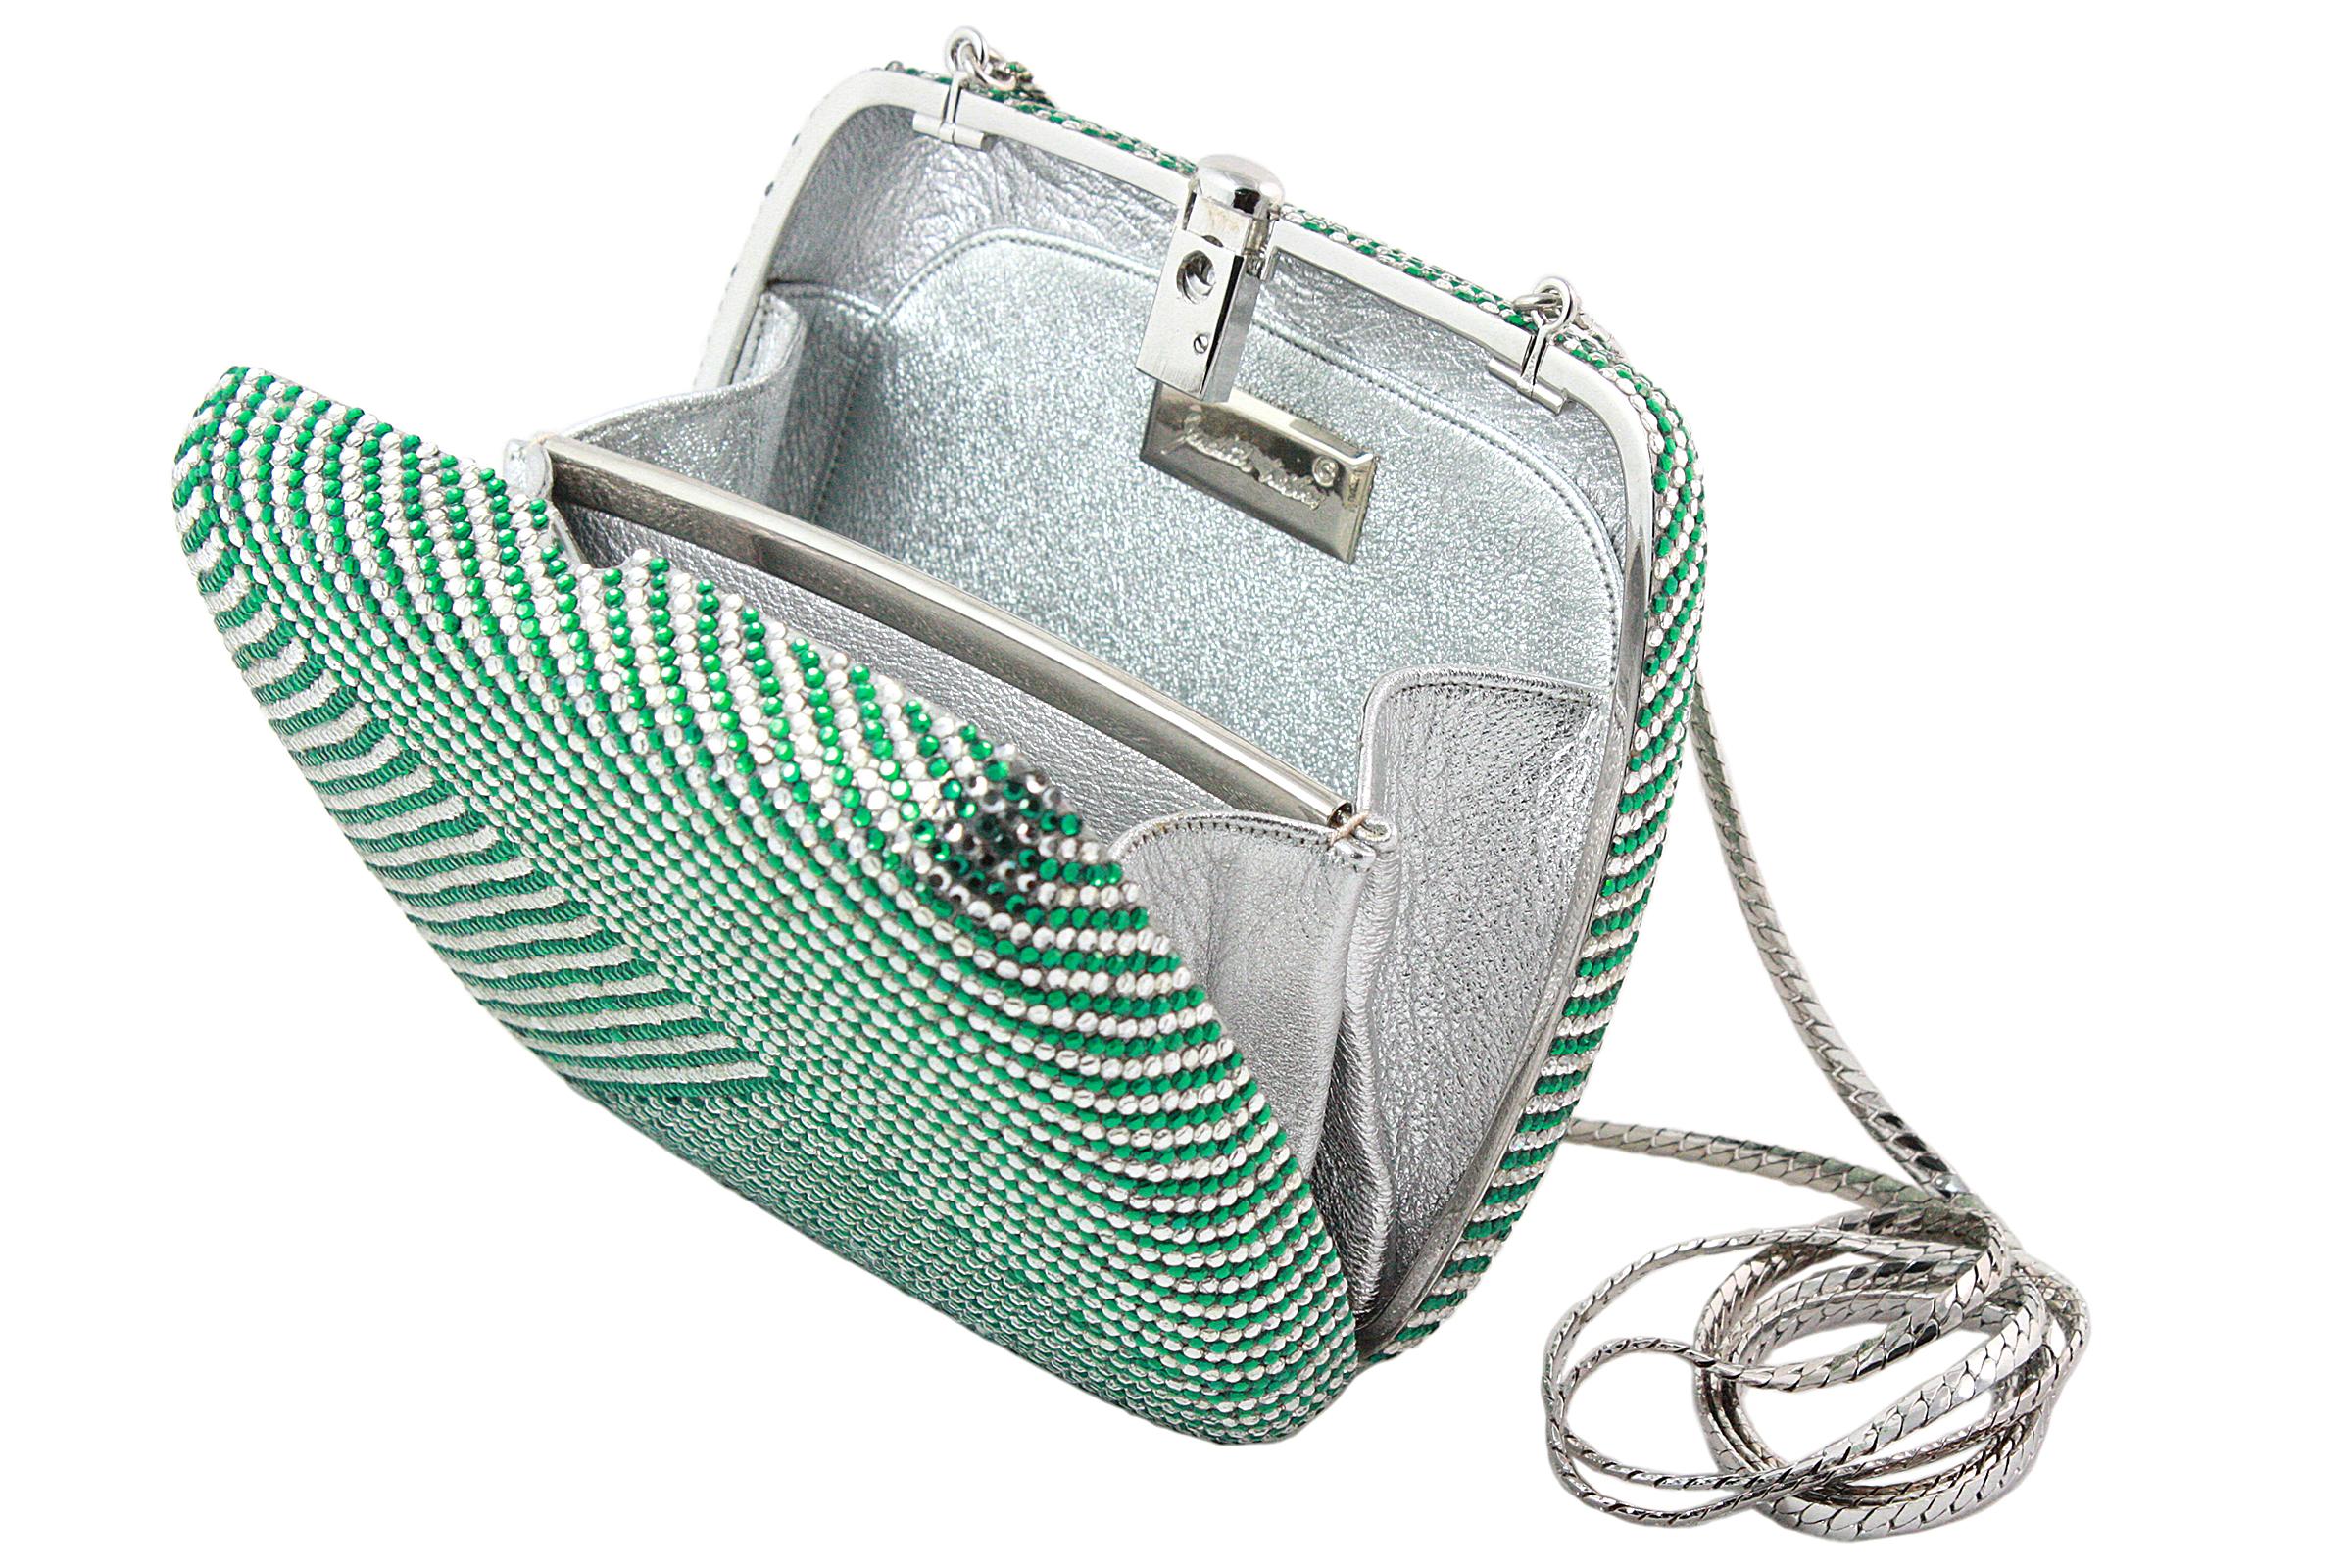  Judith Leiber Clear and Green Rhinestone Clutch In Good Condition For Sale In Los Angeles, CA